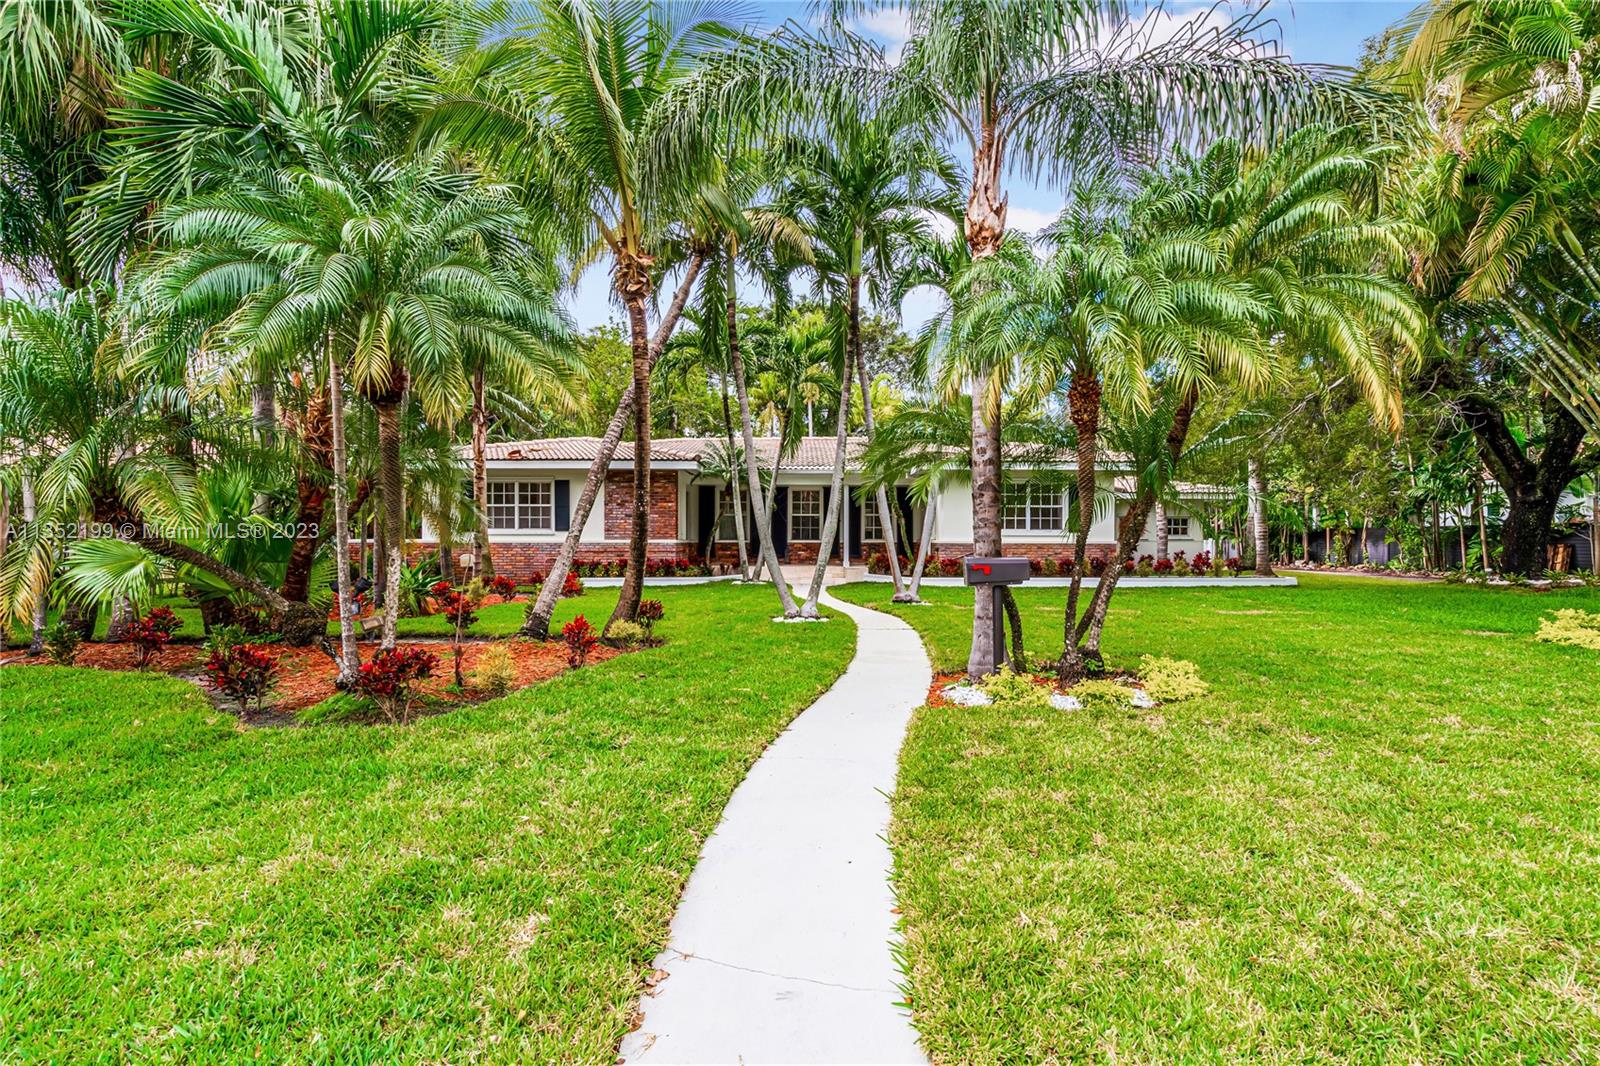 This lovely home situated in the Bay Point Estates which is one of the most sought out communities in the east bay areas of Miami is Located at walking distance from the Miami District Center and minutes away by car from Miami Beach, Wynwood, Downtown Miami, Brickell and Midtown Miami. This Gated Community features a 24/7 Guarded Security. House sits on a 19,680 SFT LOT. This community is known to allow the homeowners to build/rebuild custom homes on their lot. Buyers will need to take in consideration that the Property is leased until March of 2024 and the tenants have secured an agreement for now showings during the term of their 24 month lease.